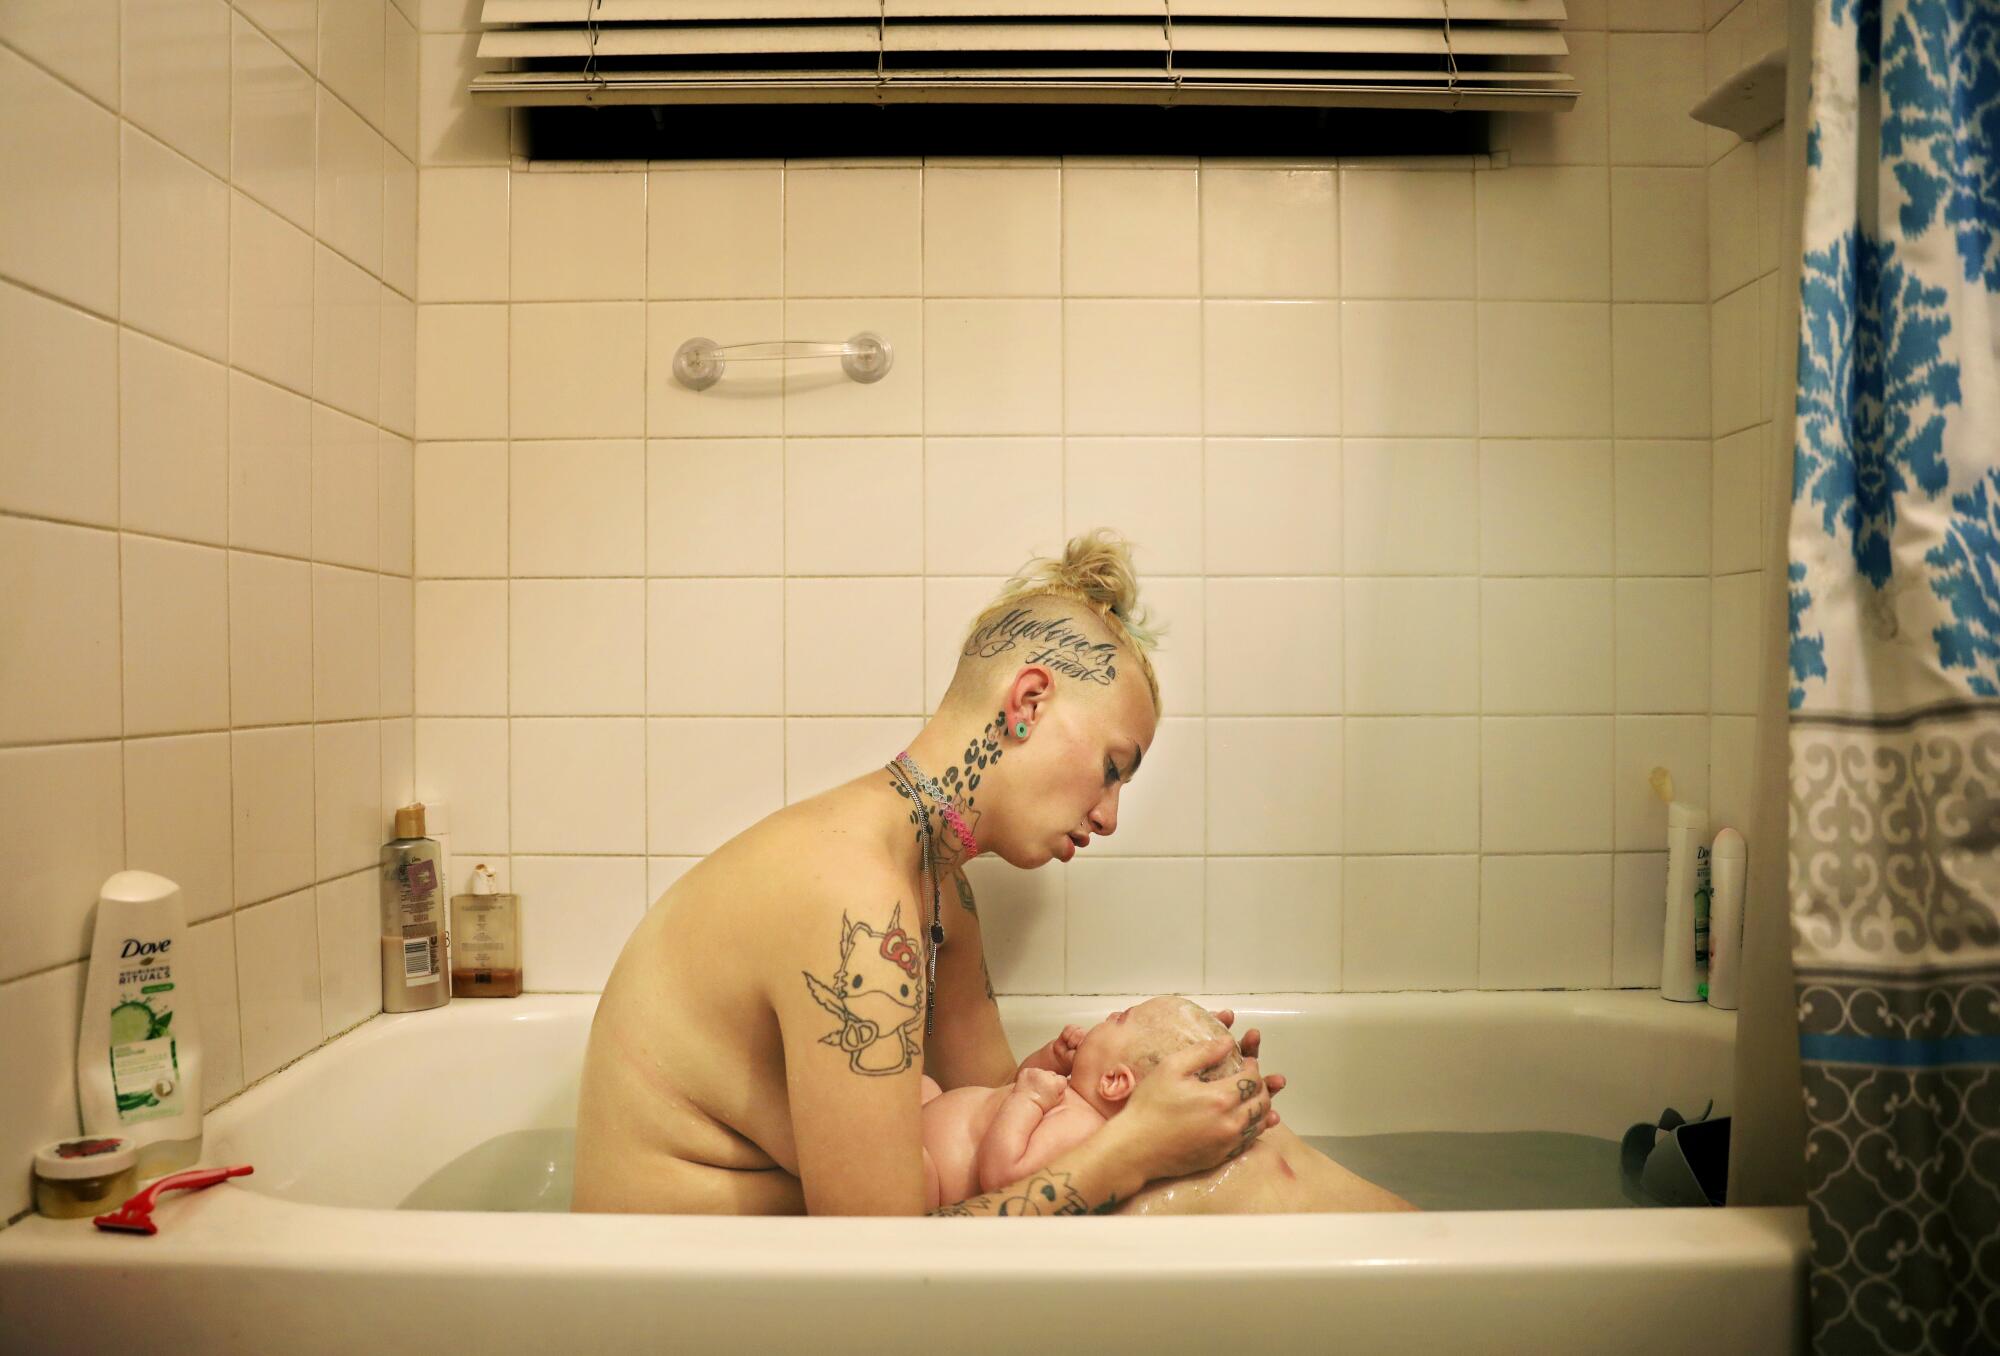 A woman naked in a bathtub holding a baby in her lap.